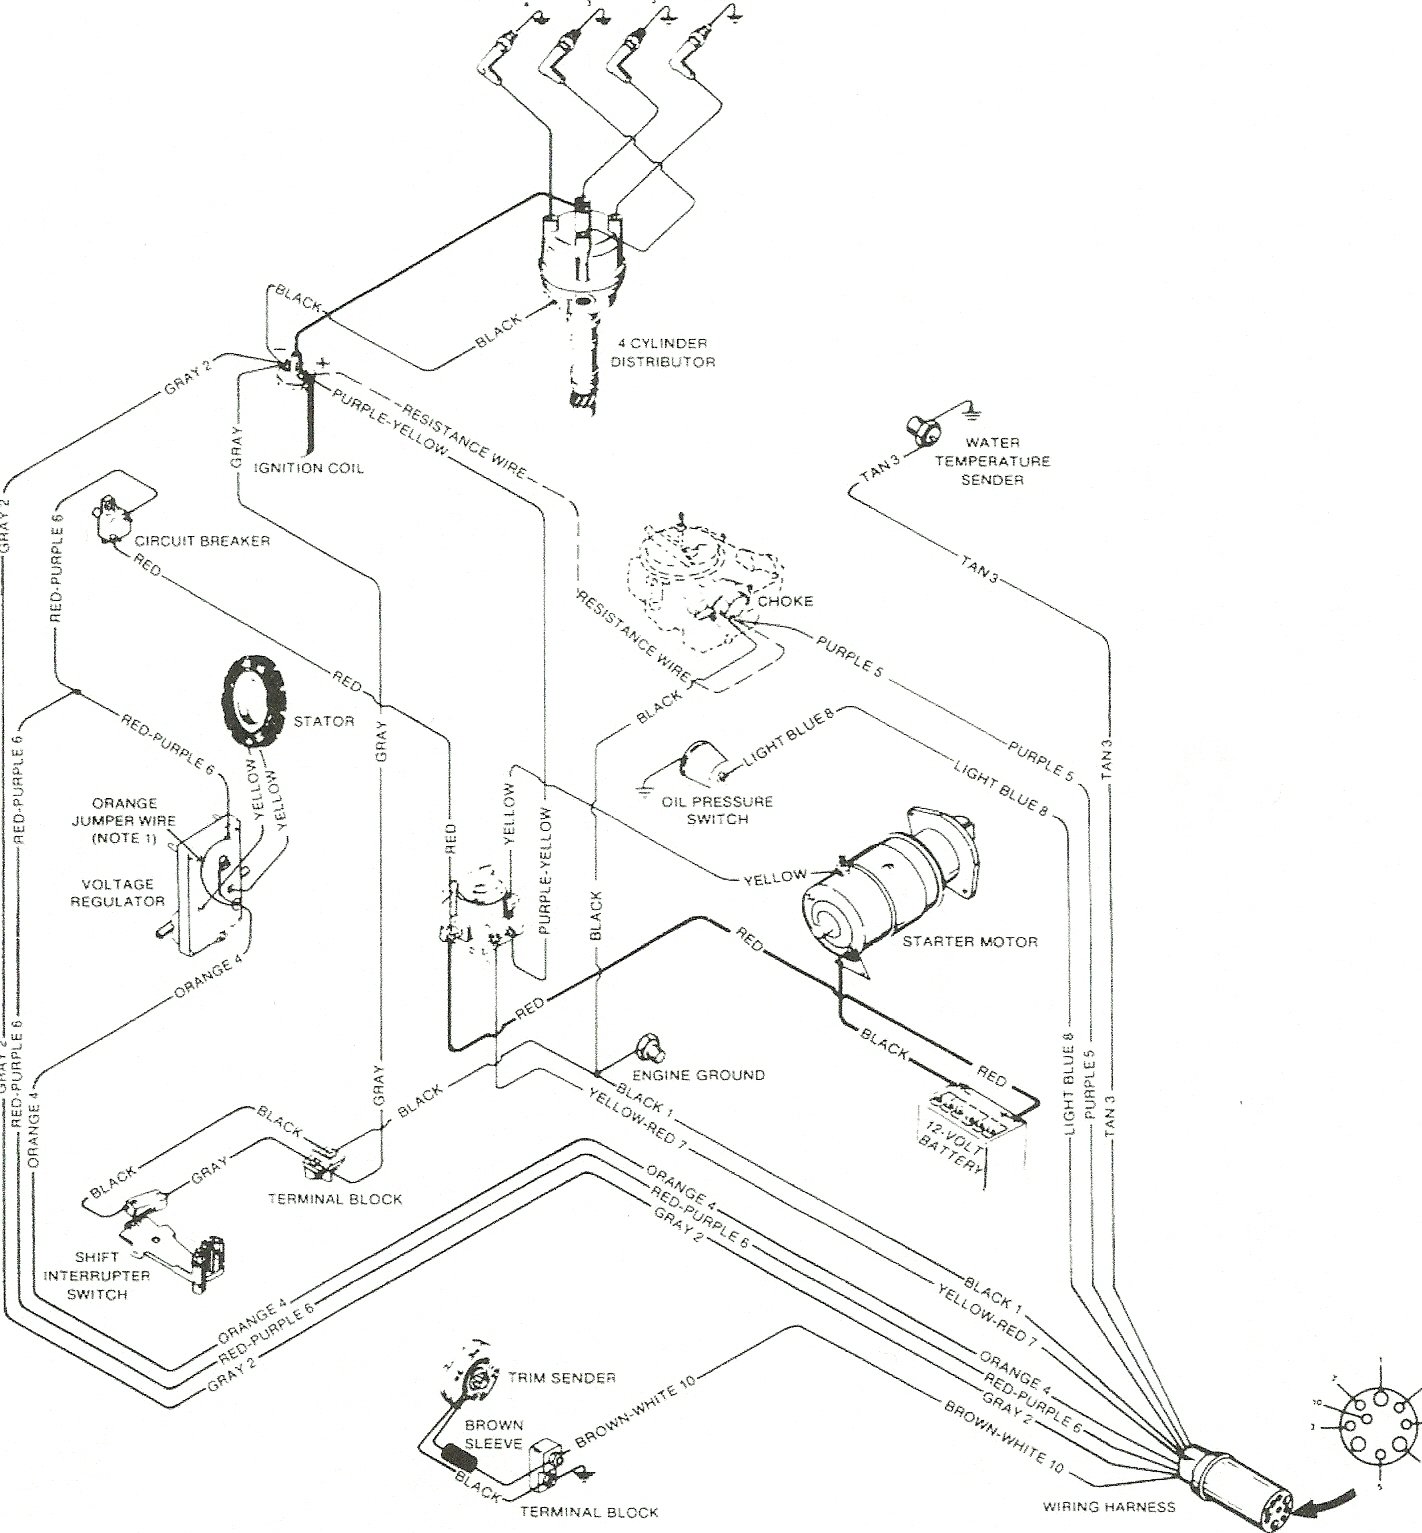 Electronic Ignition Coil Wiring Diagram from schematron.org